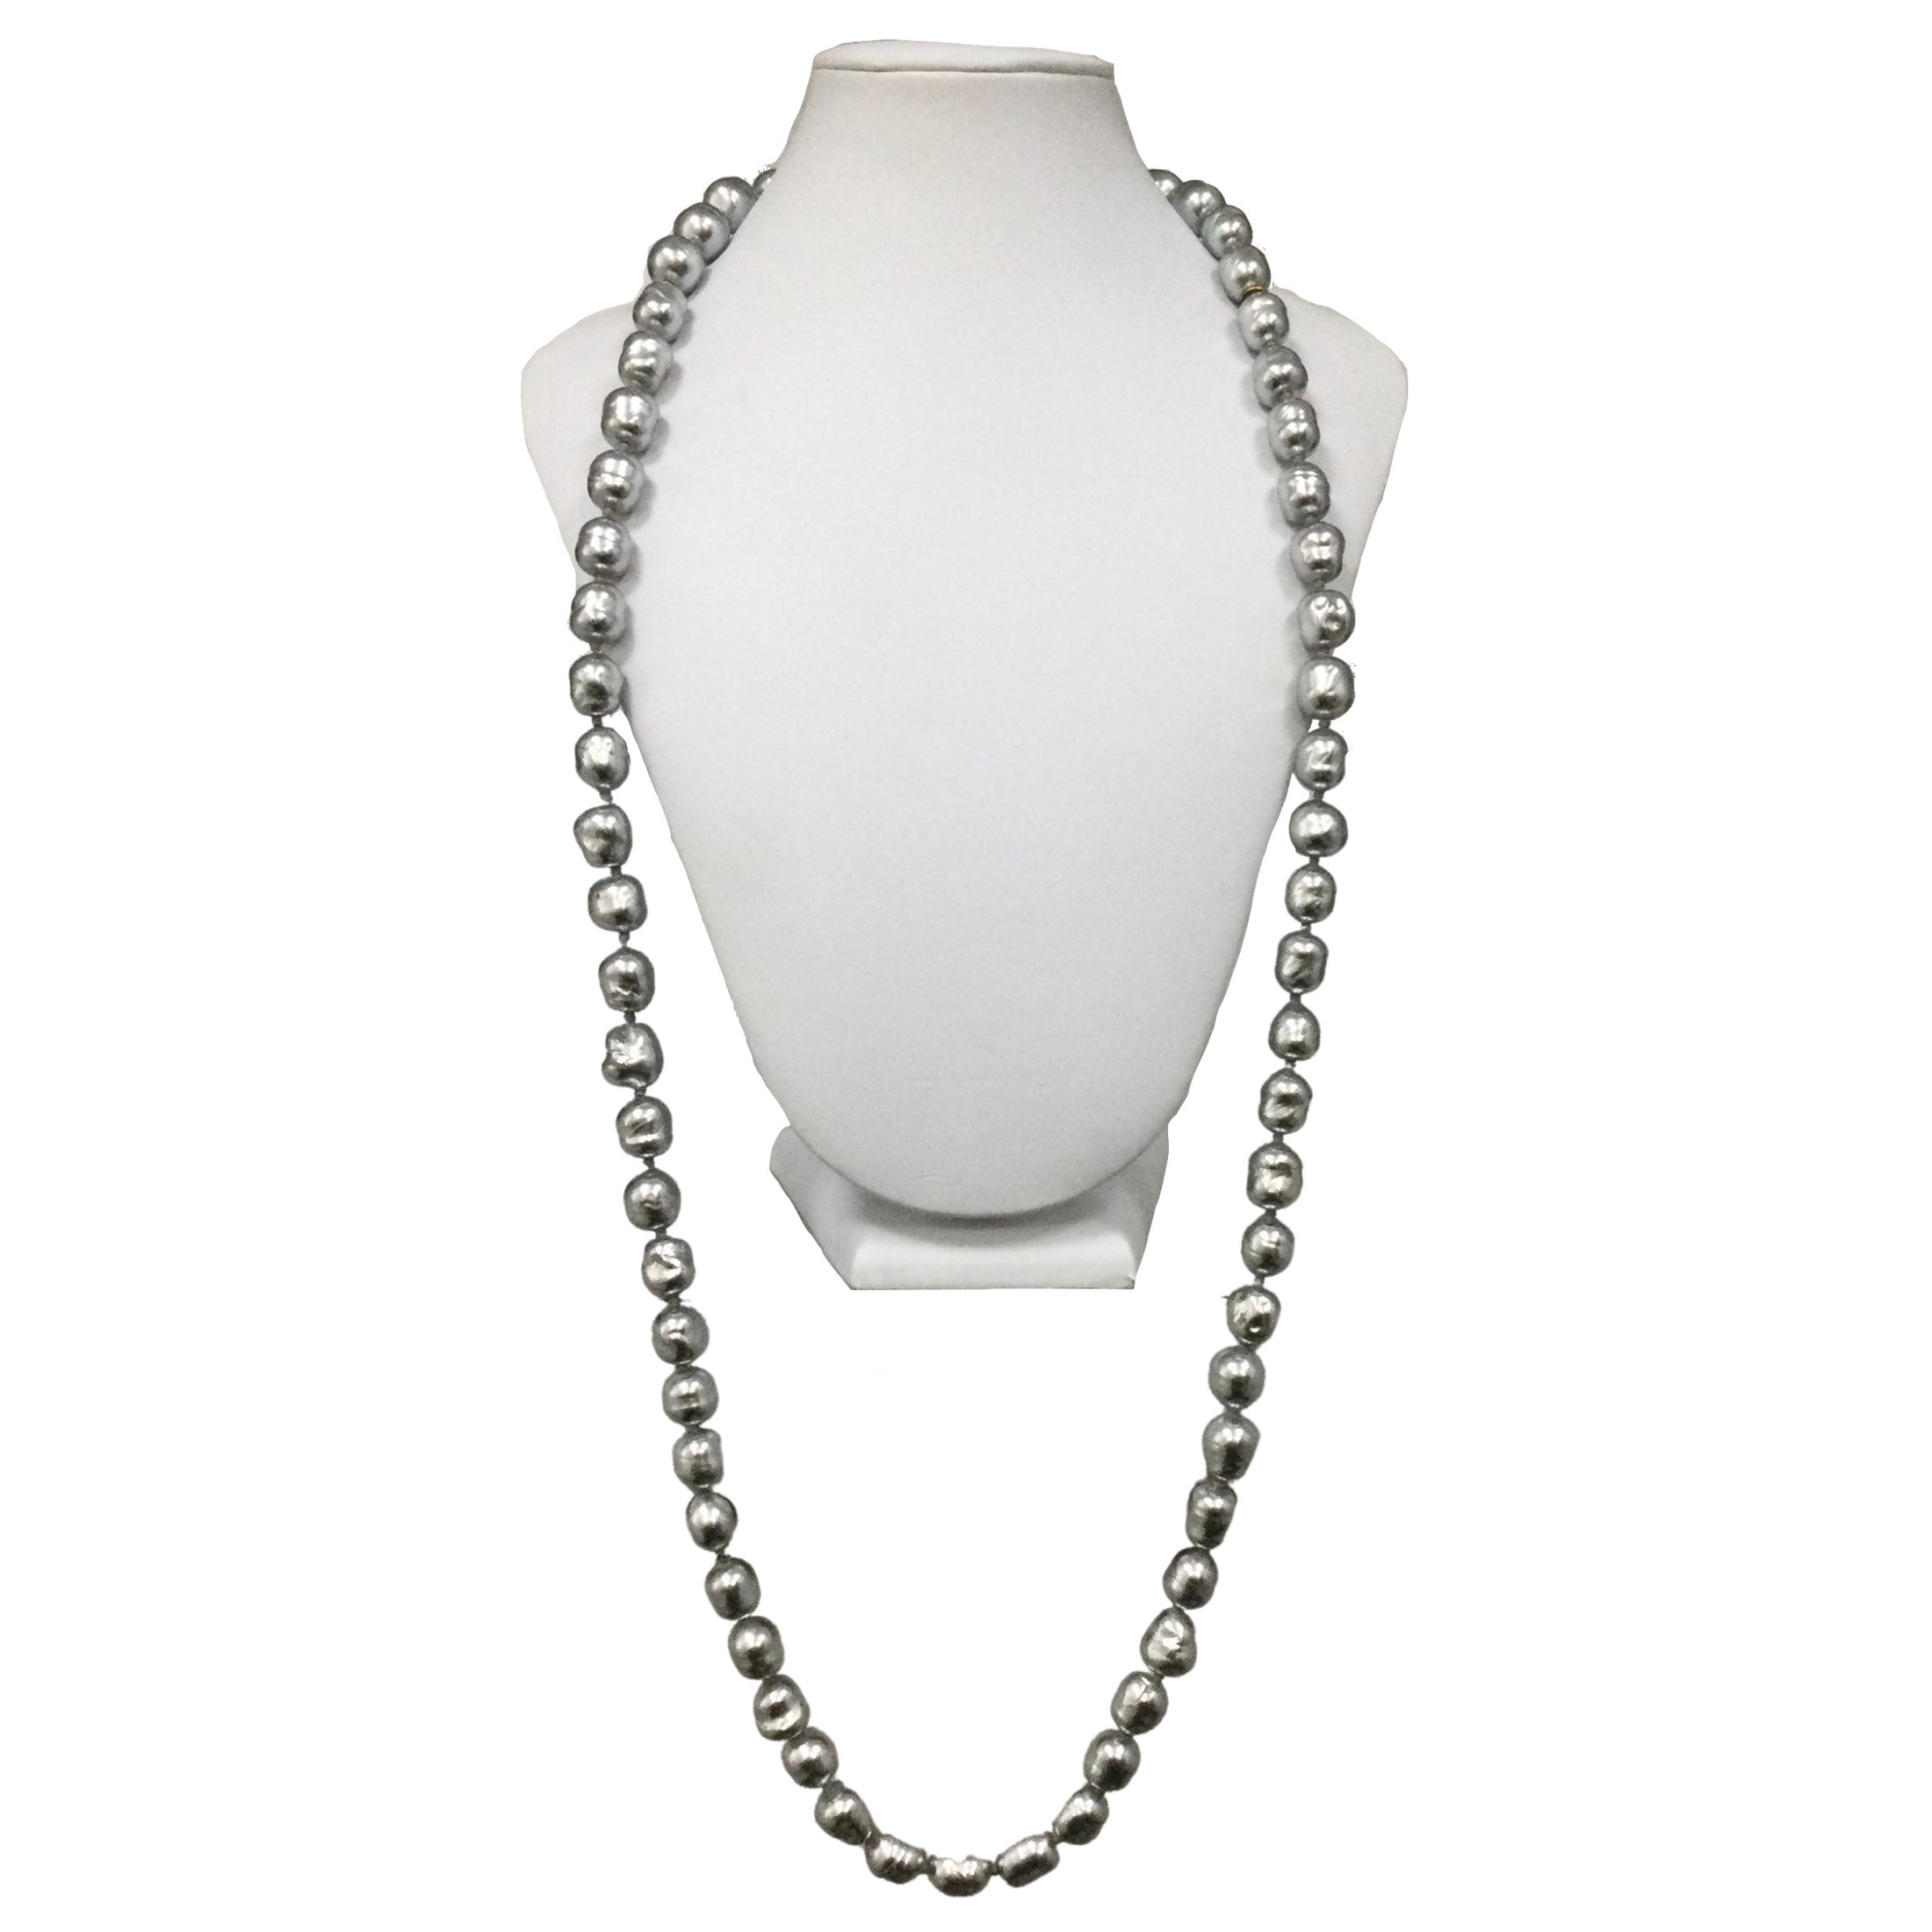 Chanel Silver Metallic Vintage 1981 Chunky Pearl Long Necklace